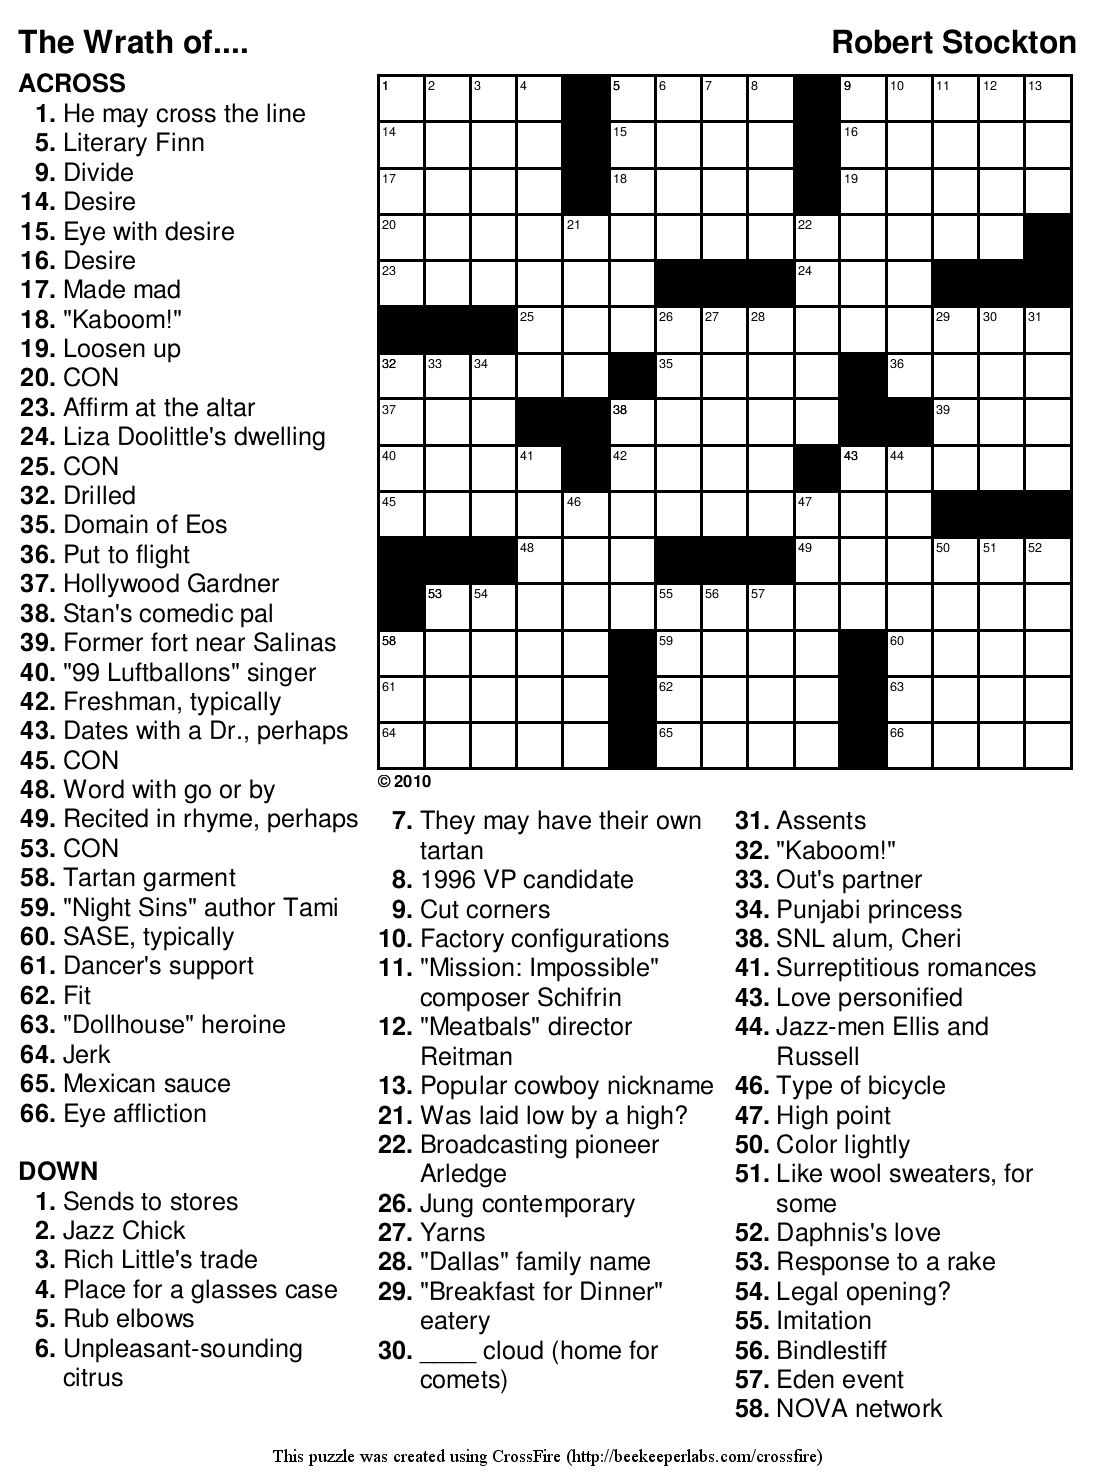 Free Daily Online Printable Crossword Puzzles | Free Printables - Print Puzzle Online